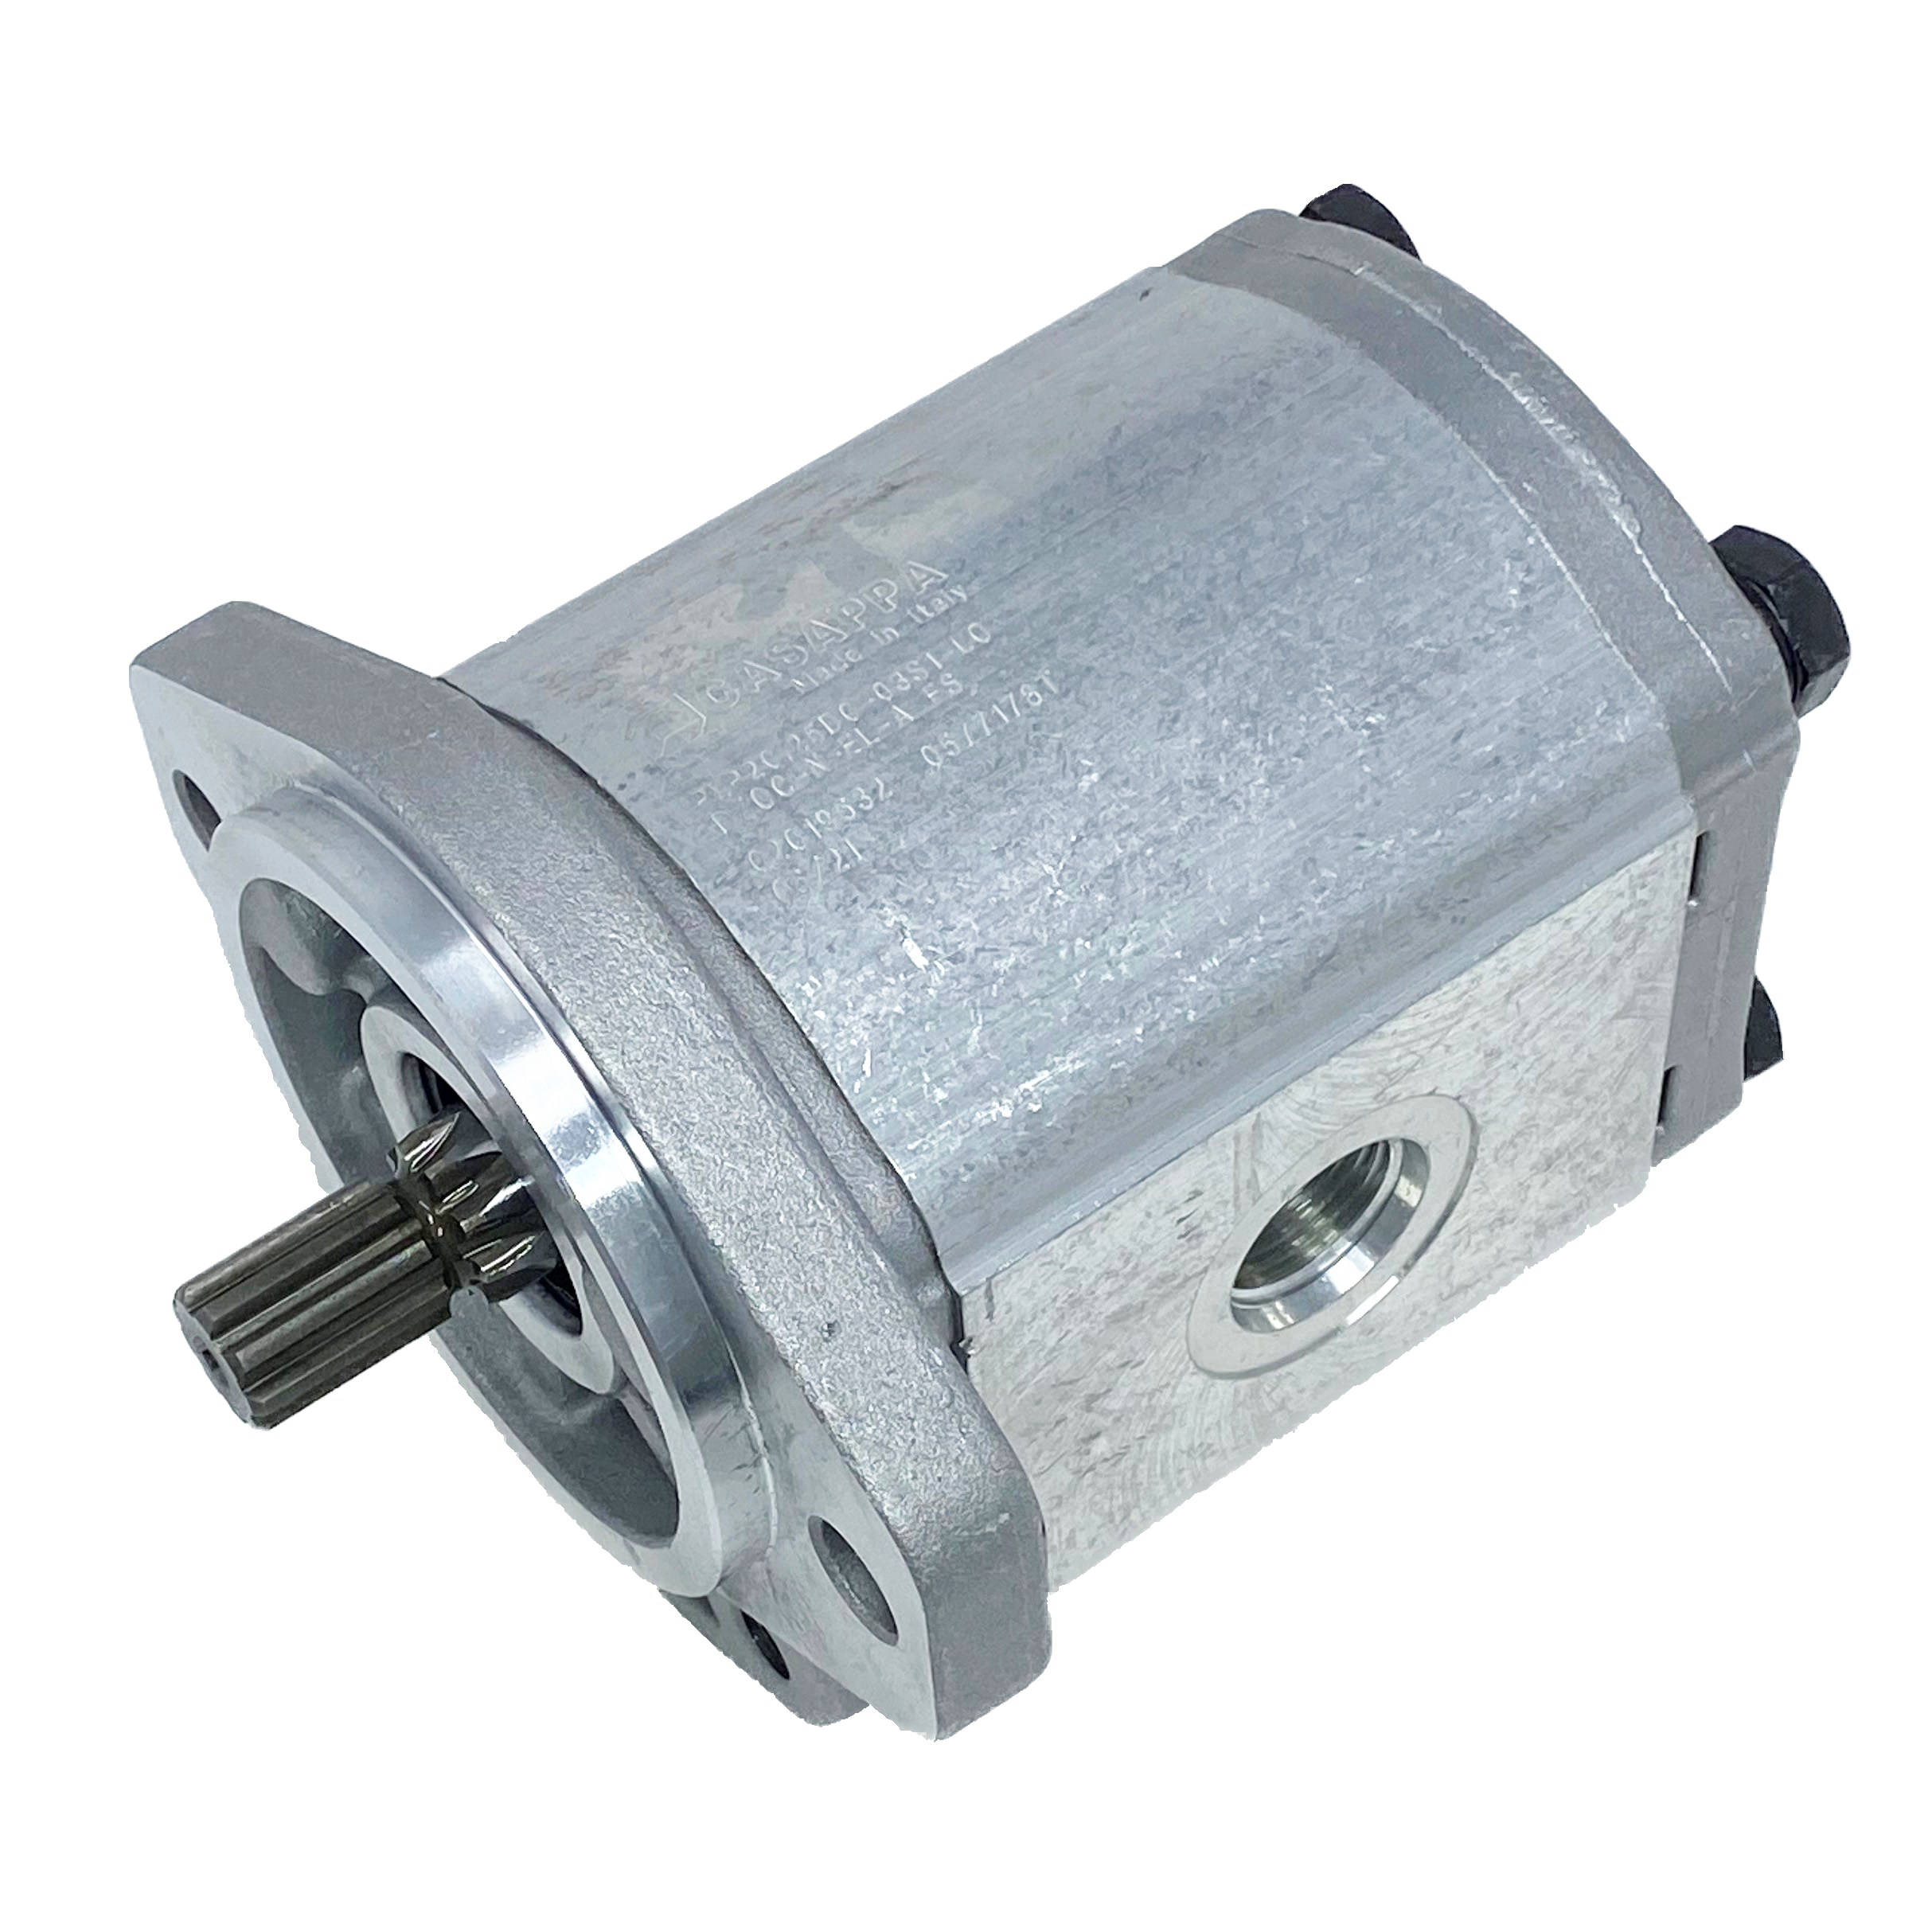 PHM20.25B0-07S9-LOC/OG-N-EL : Casappa Polaris Gear Motor, 26.42cc, 3335psi Rated, 3000RPM, Reversible Interior Drain, 11T 16/32dp Shaft, SAE A 2-Bolt Flange, 0.625 (5/8") #10 SAE Inlet, 1.25" #20 SAE Outlet, Cast Iron Body, Aluminum Flange